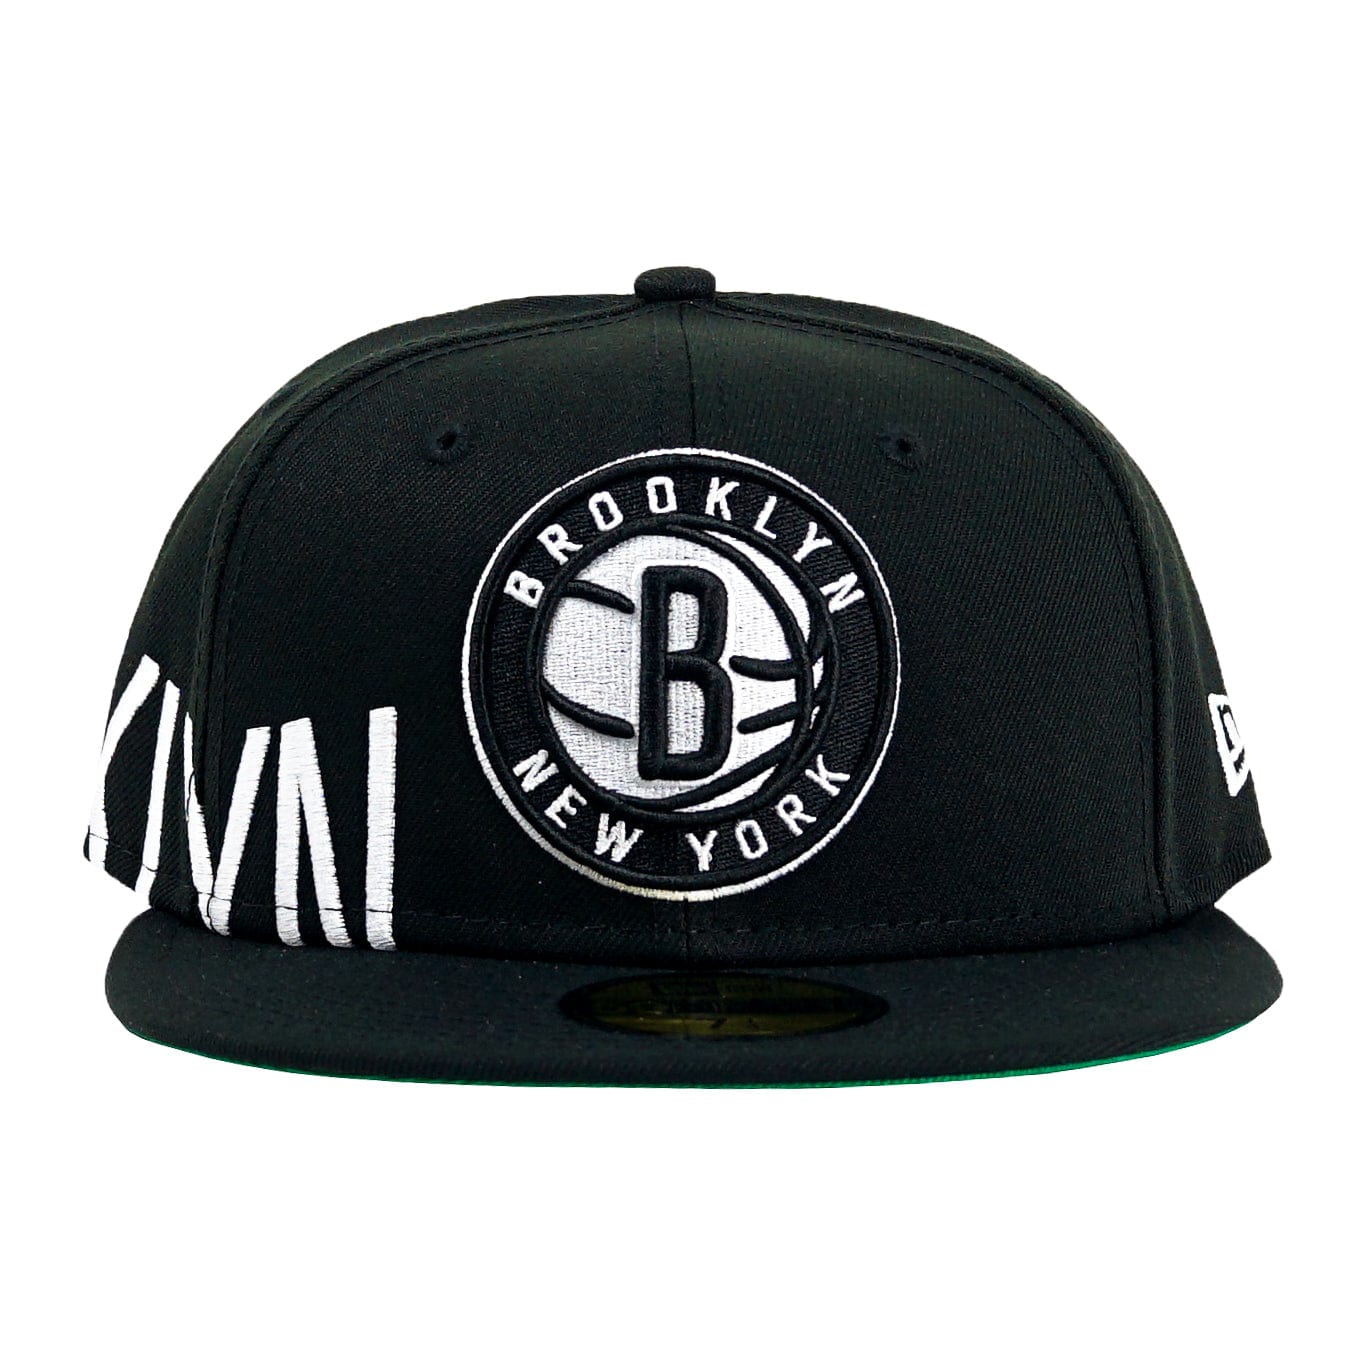 Brooklyn Nets Sidesplit 59Fifty Fitted Hat in black - New Era - State Of Flux